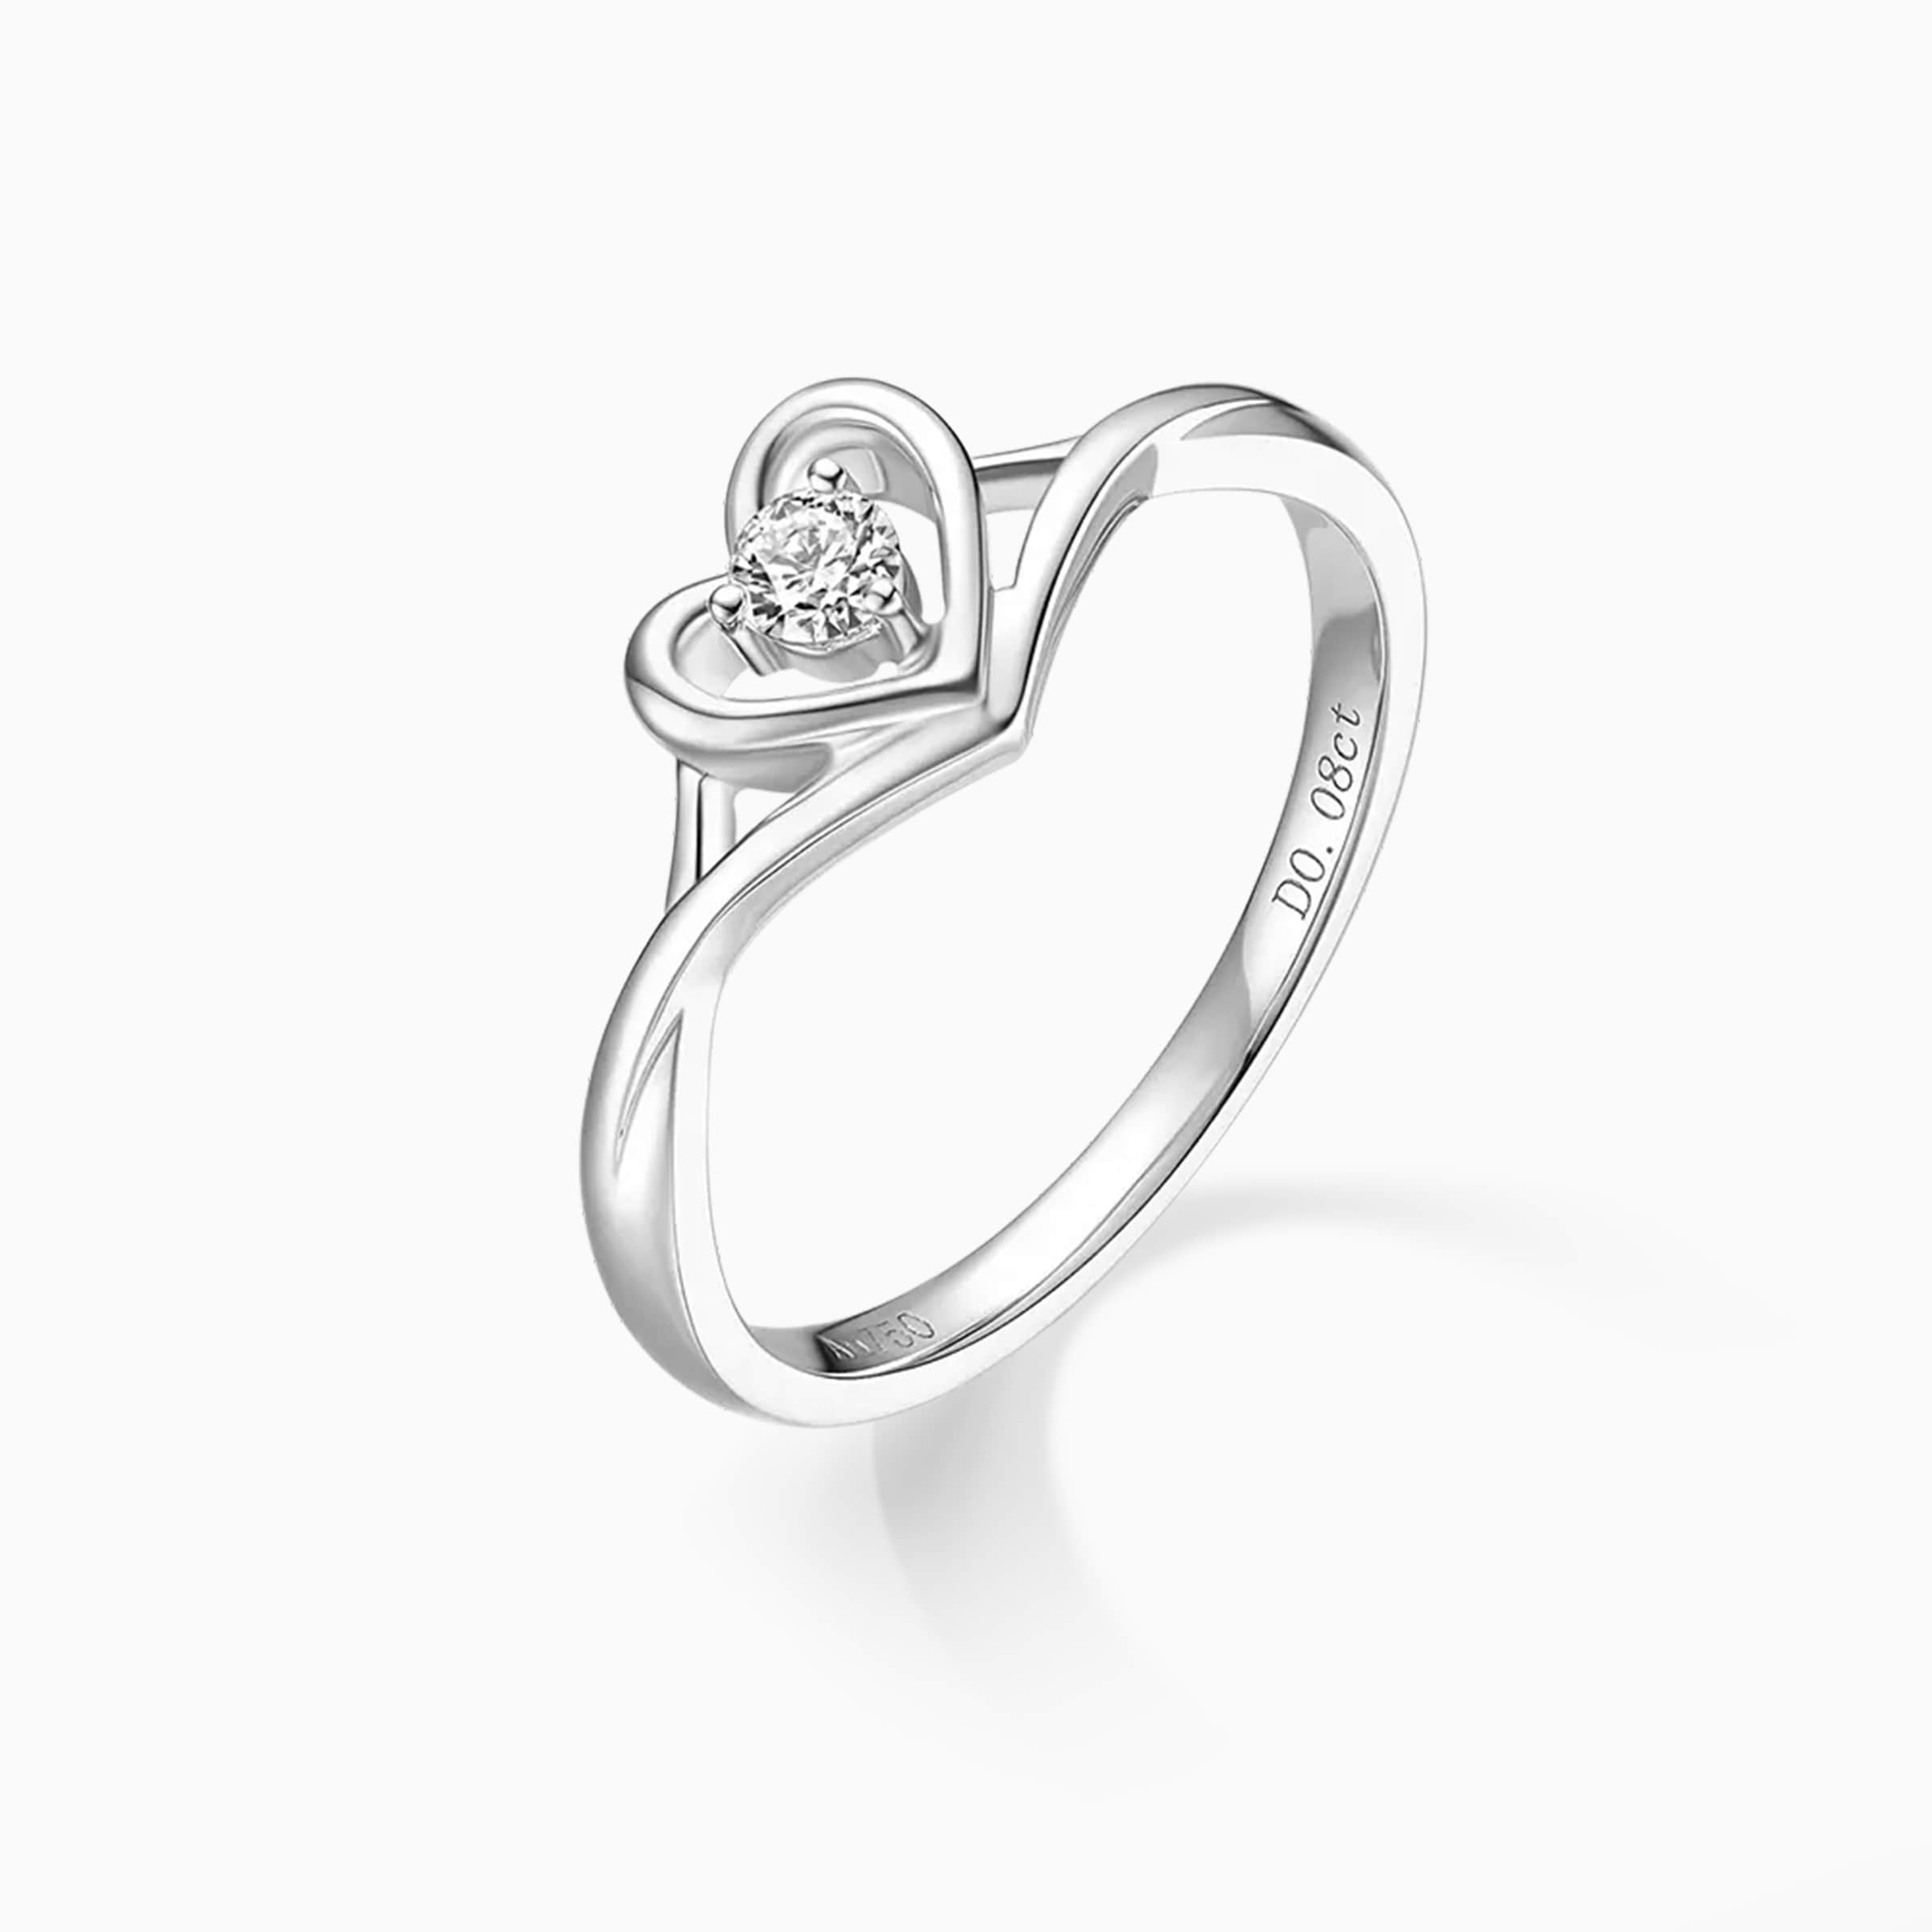 Darry Ring simple promise ring side view